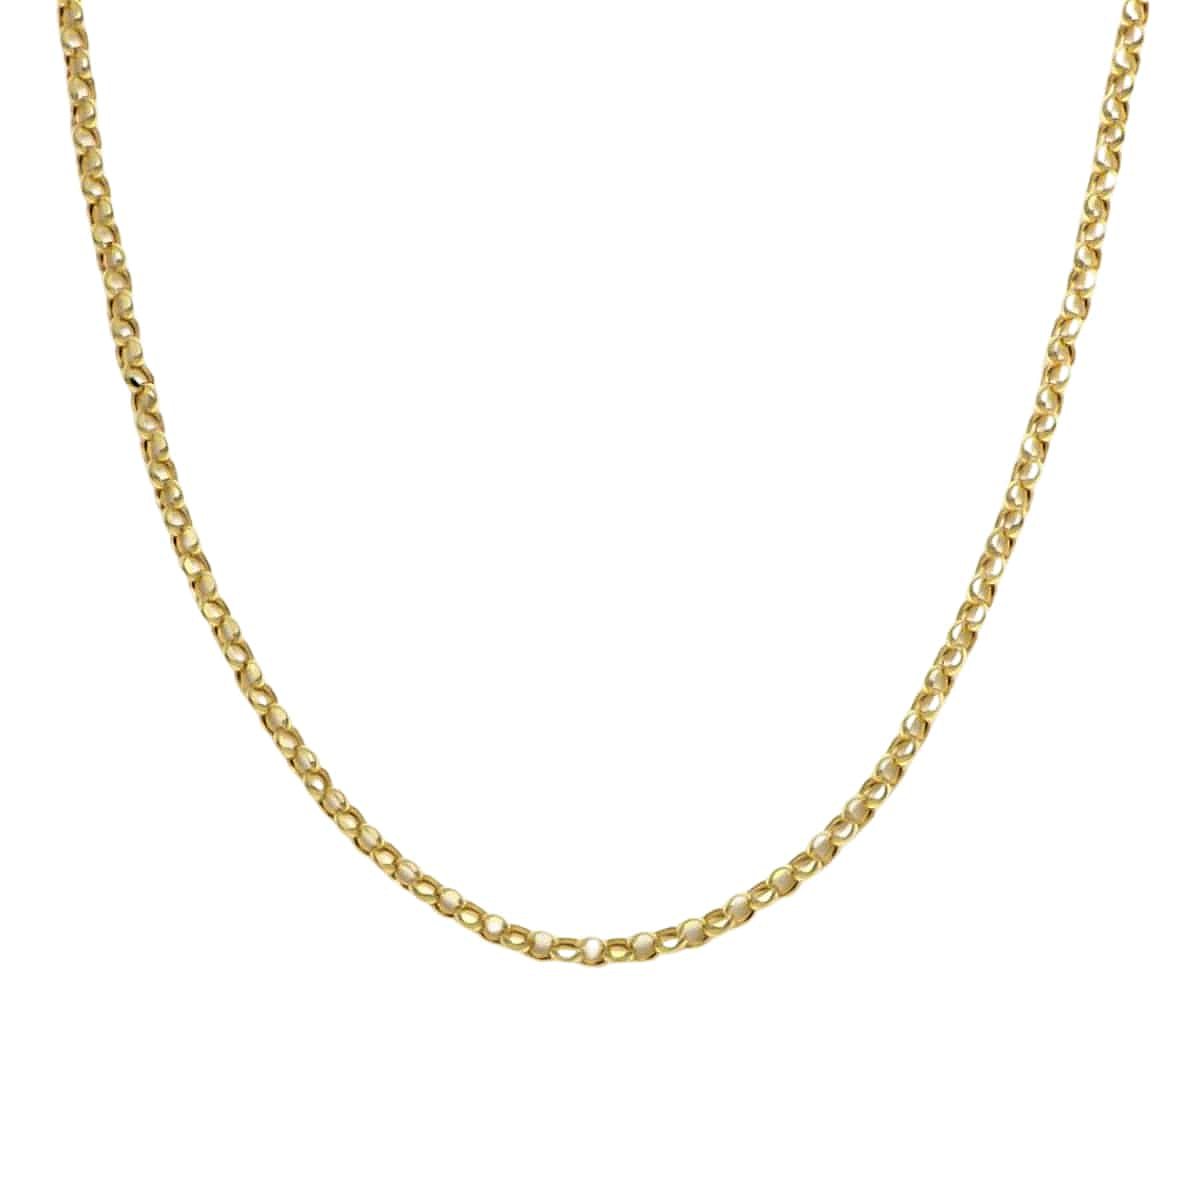 Maestro Collection - 9K Yellow Gold Rolo Necklace (Size - 20), Gold Wt. 4.5 Gms